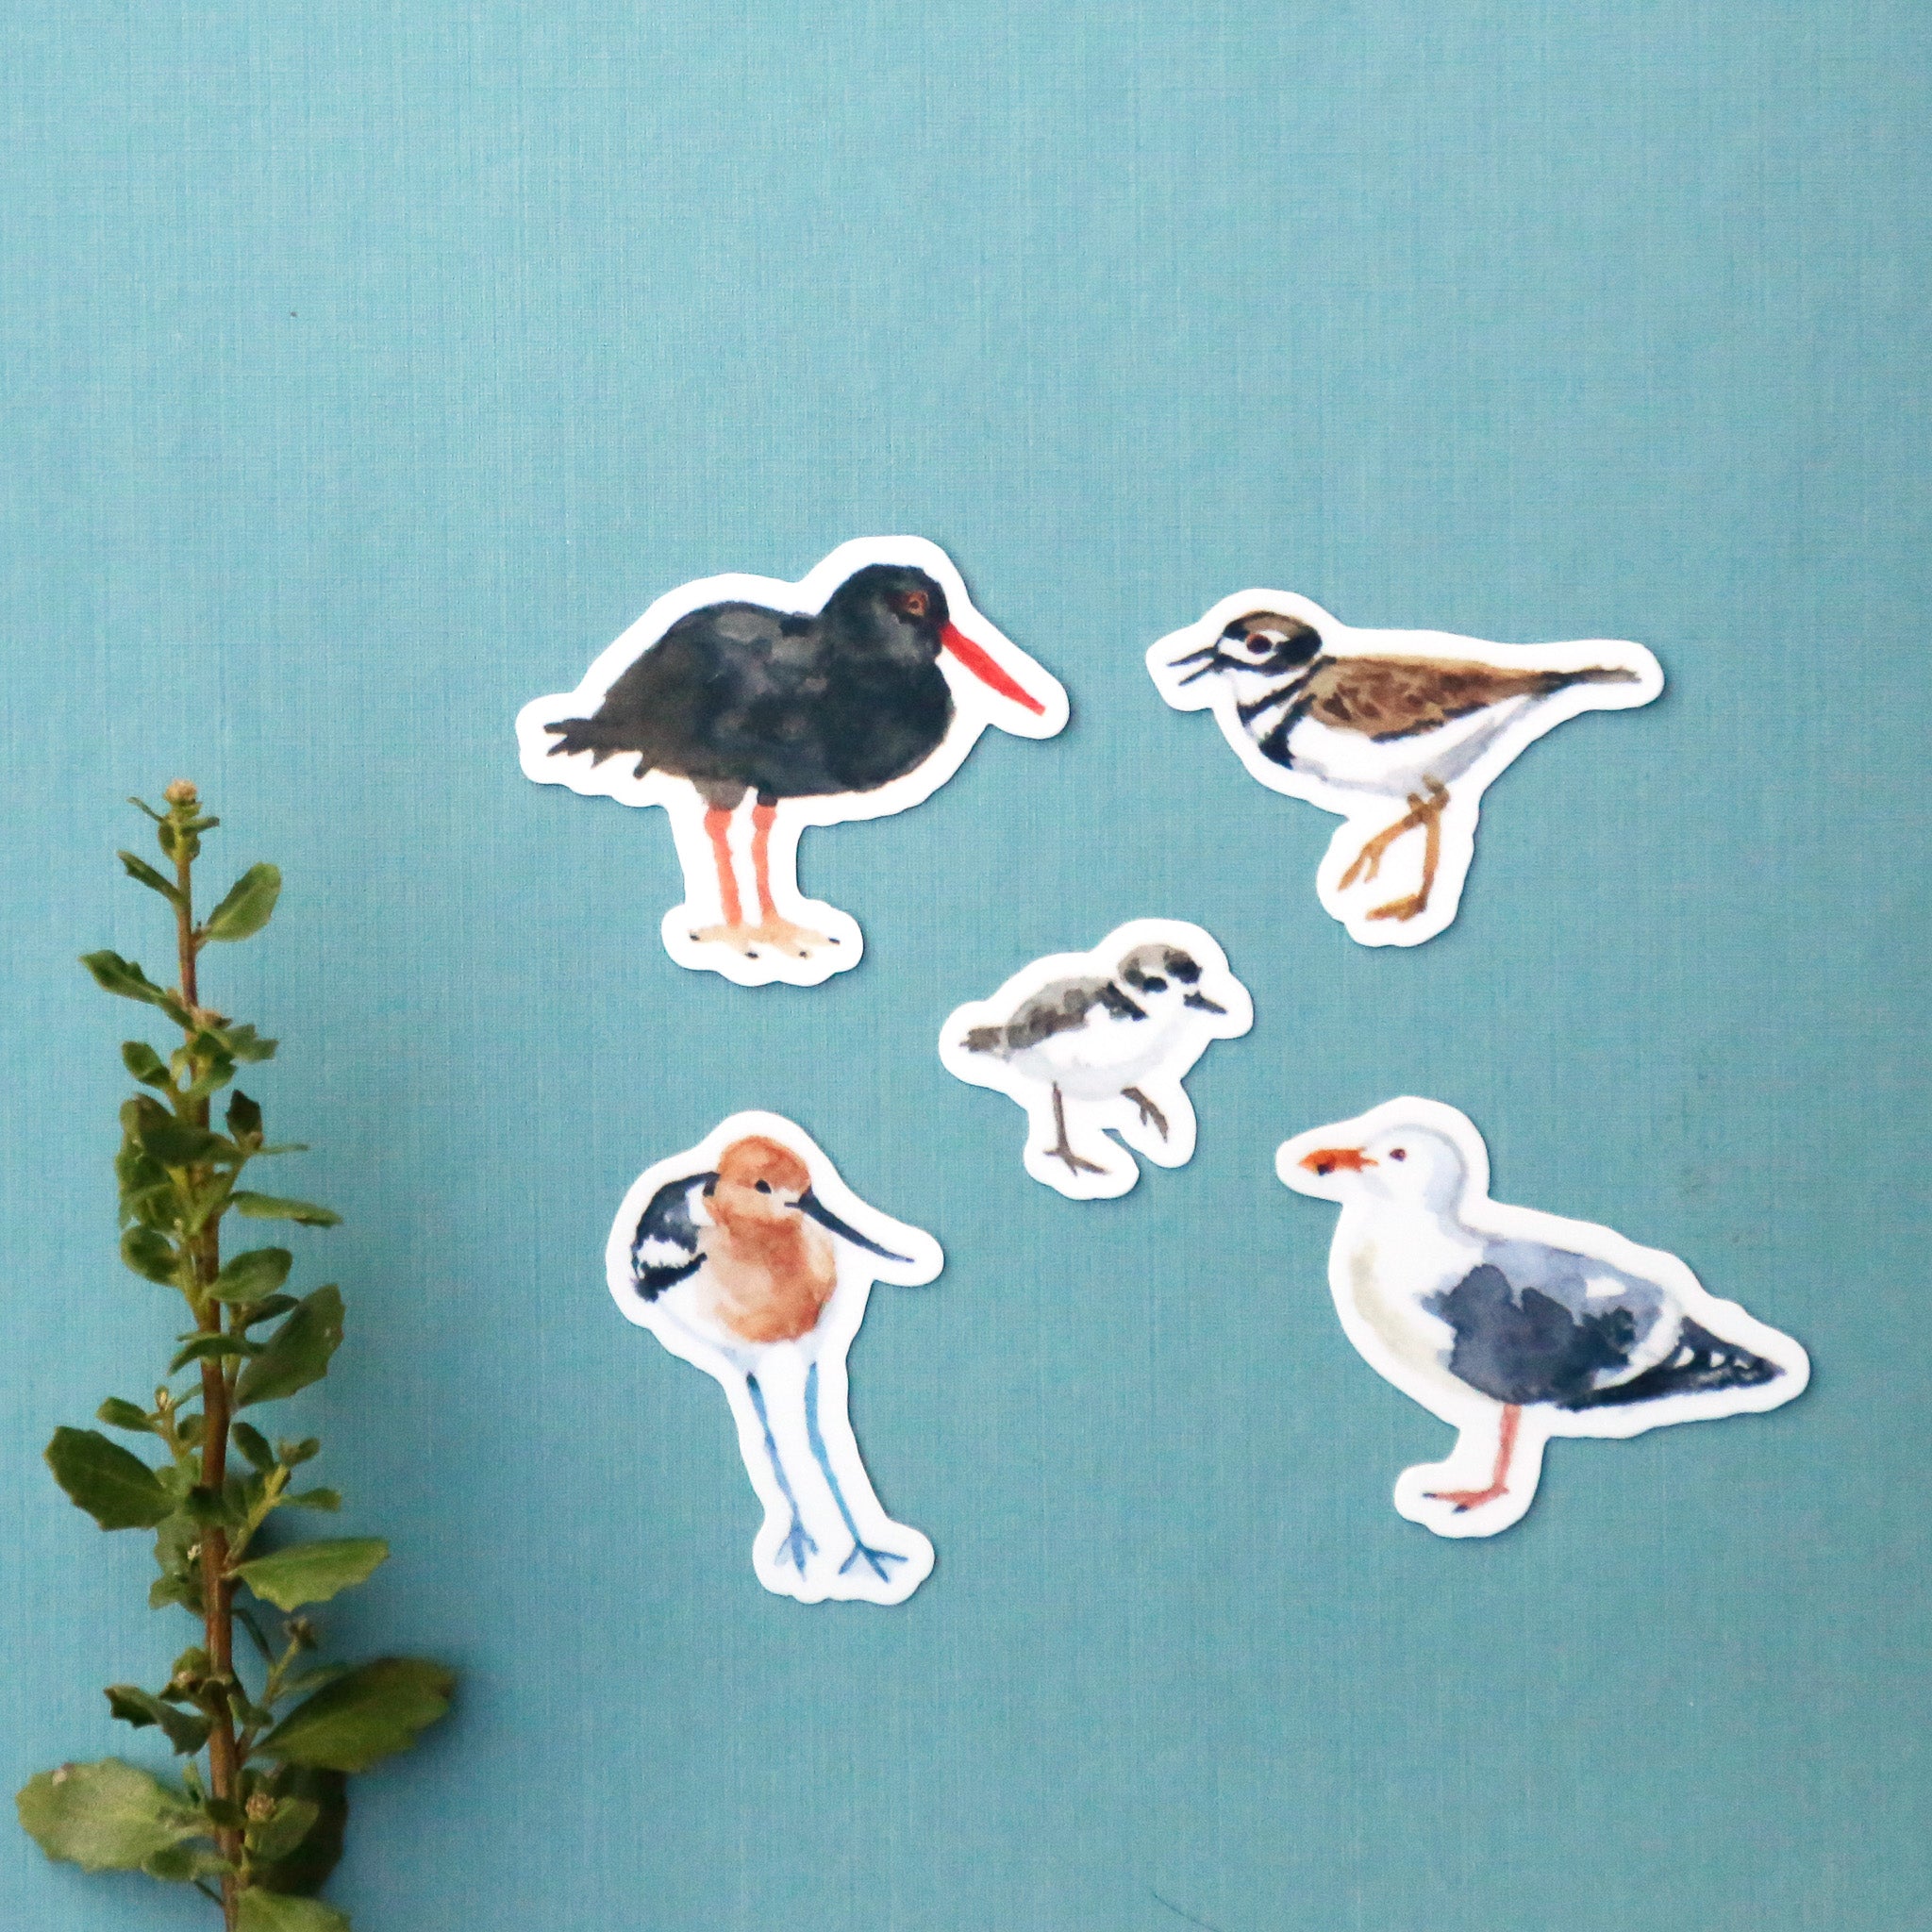 Watercolor Birds Stickers - Set of 52 Stickers